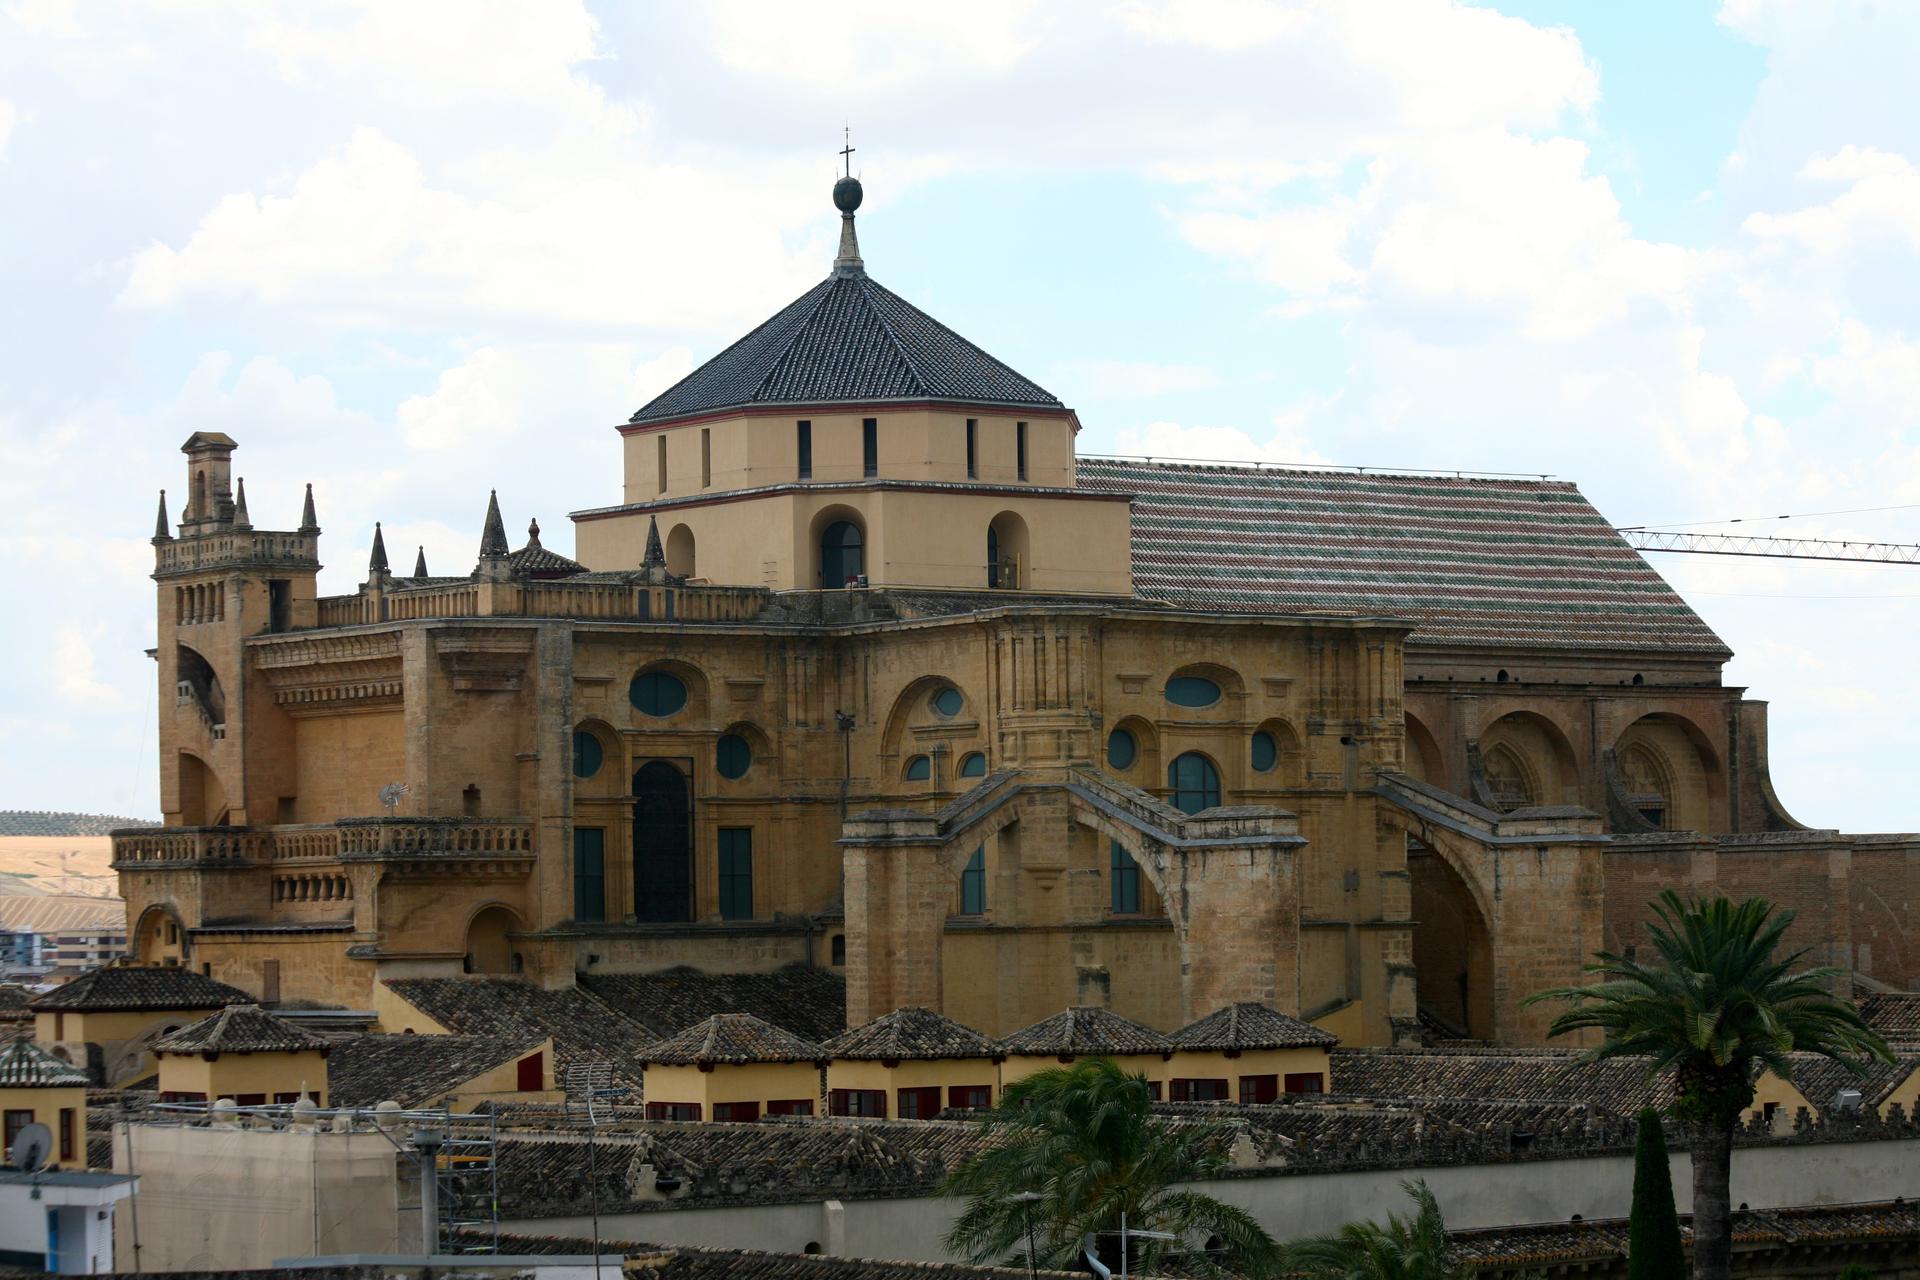 The Mosque-Cathedral at Cordova